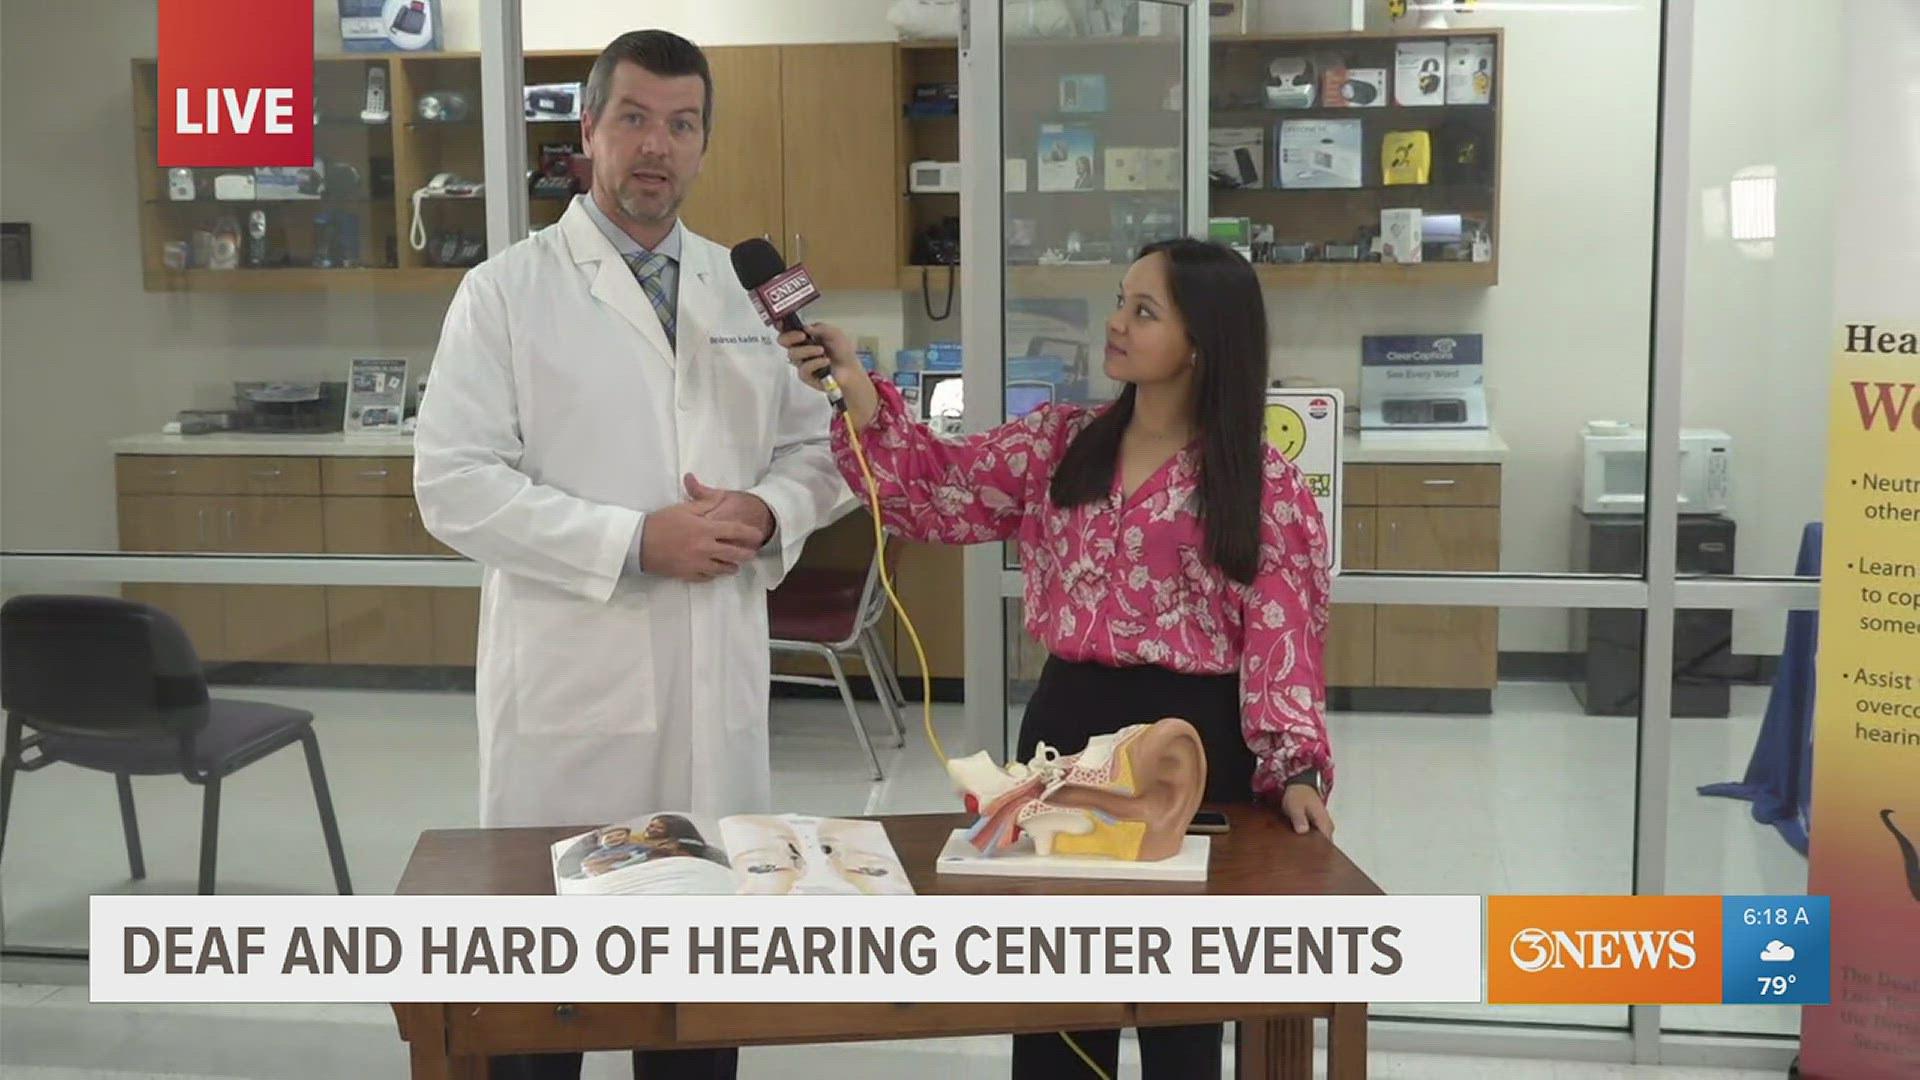 Dr. Andreas Kaden says there are affordable options available locally for those who are experiencing issues with their hearing.